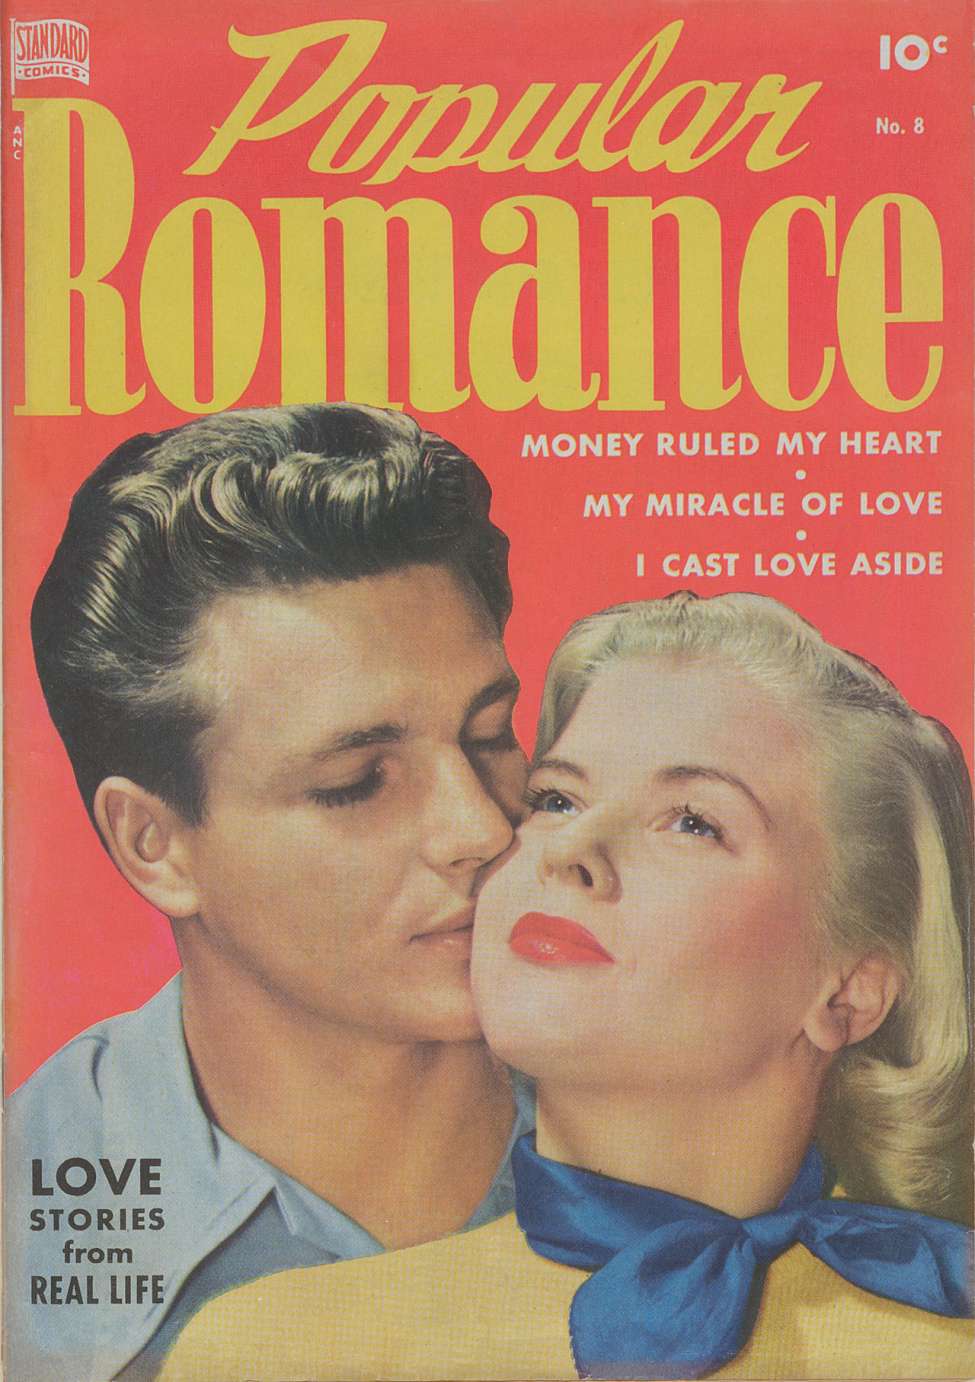 Book Cover For Popular Romance 8